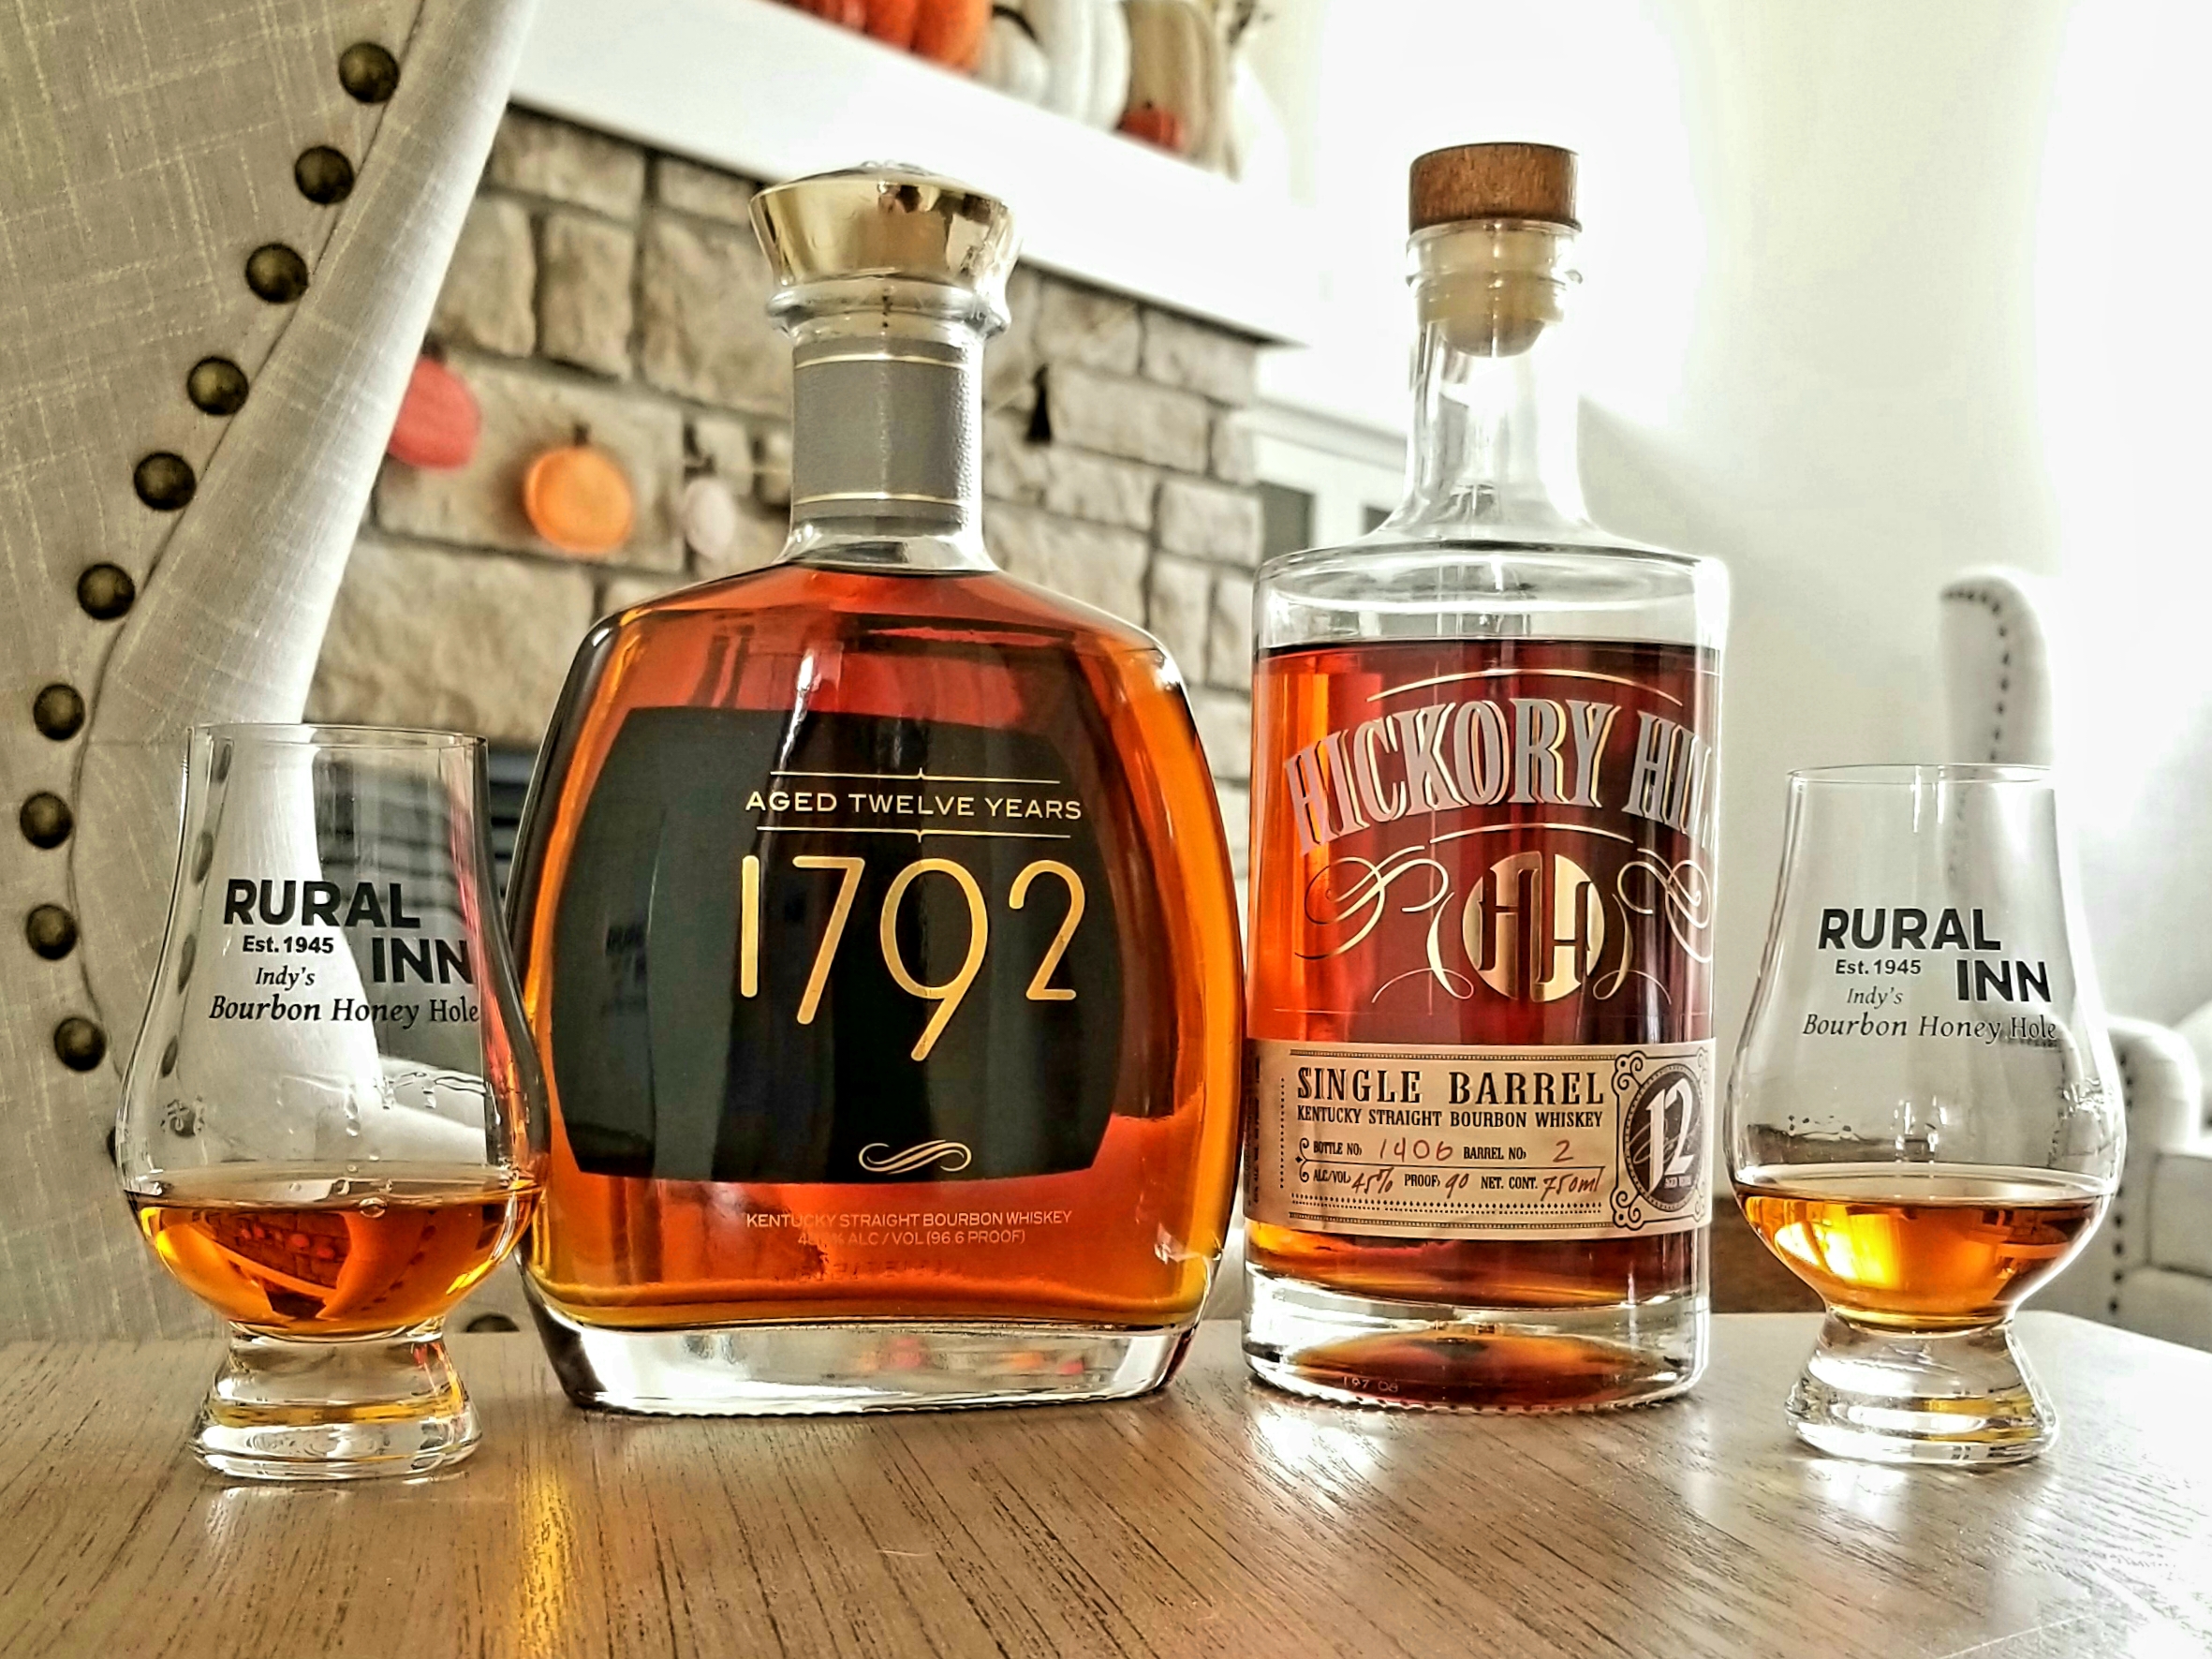 Hickory Hills Single Barrel vs 1792 Aged 12 Years Comparison Review